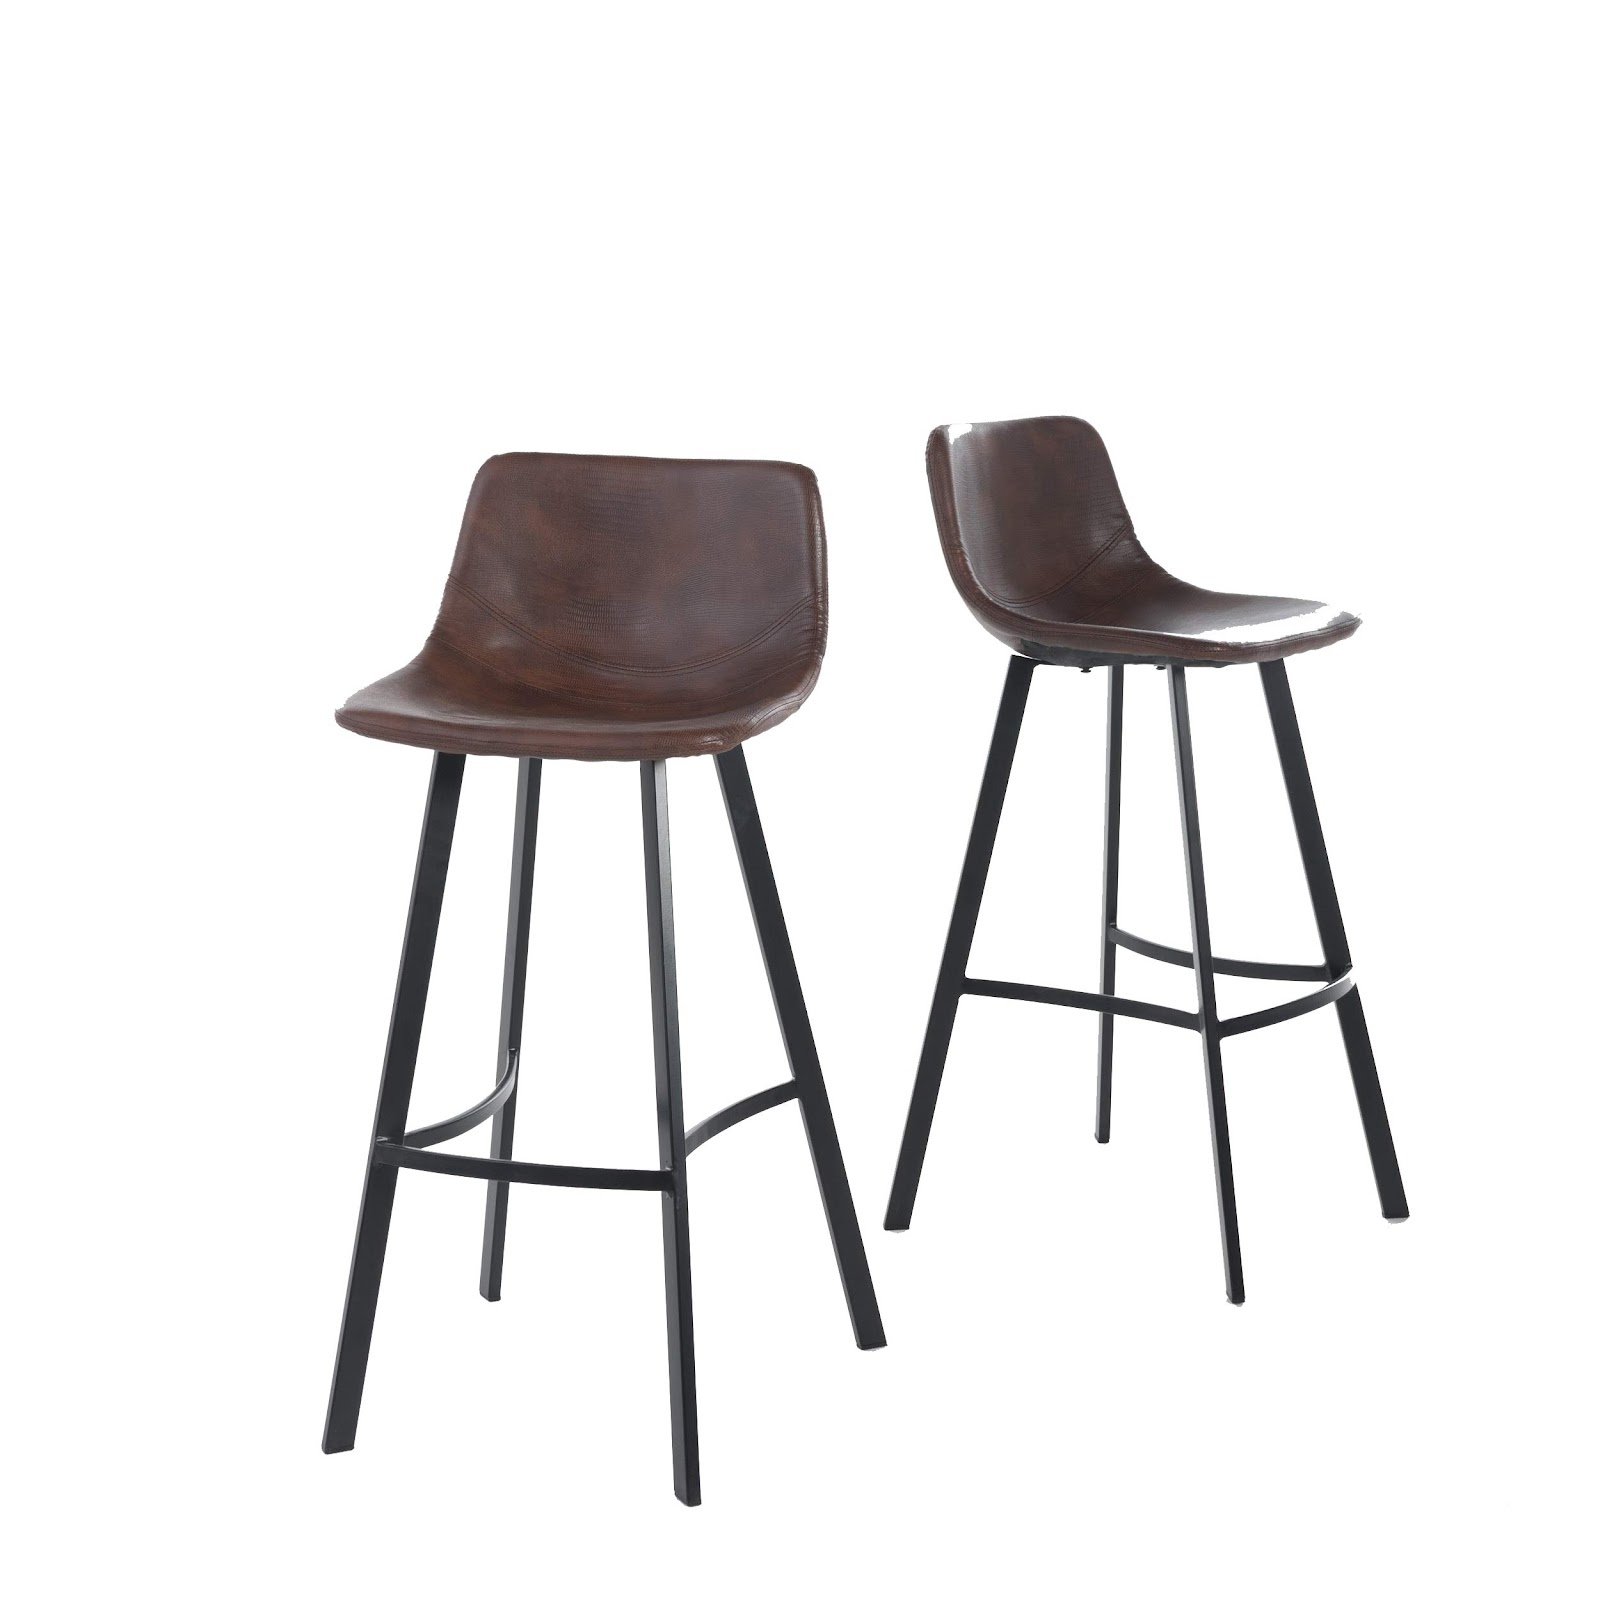 Christopher Knight Home Dax Barstools